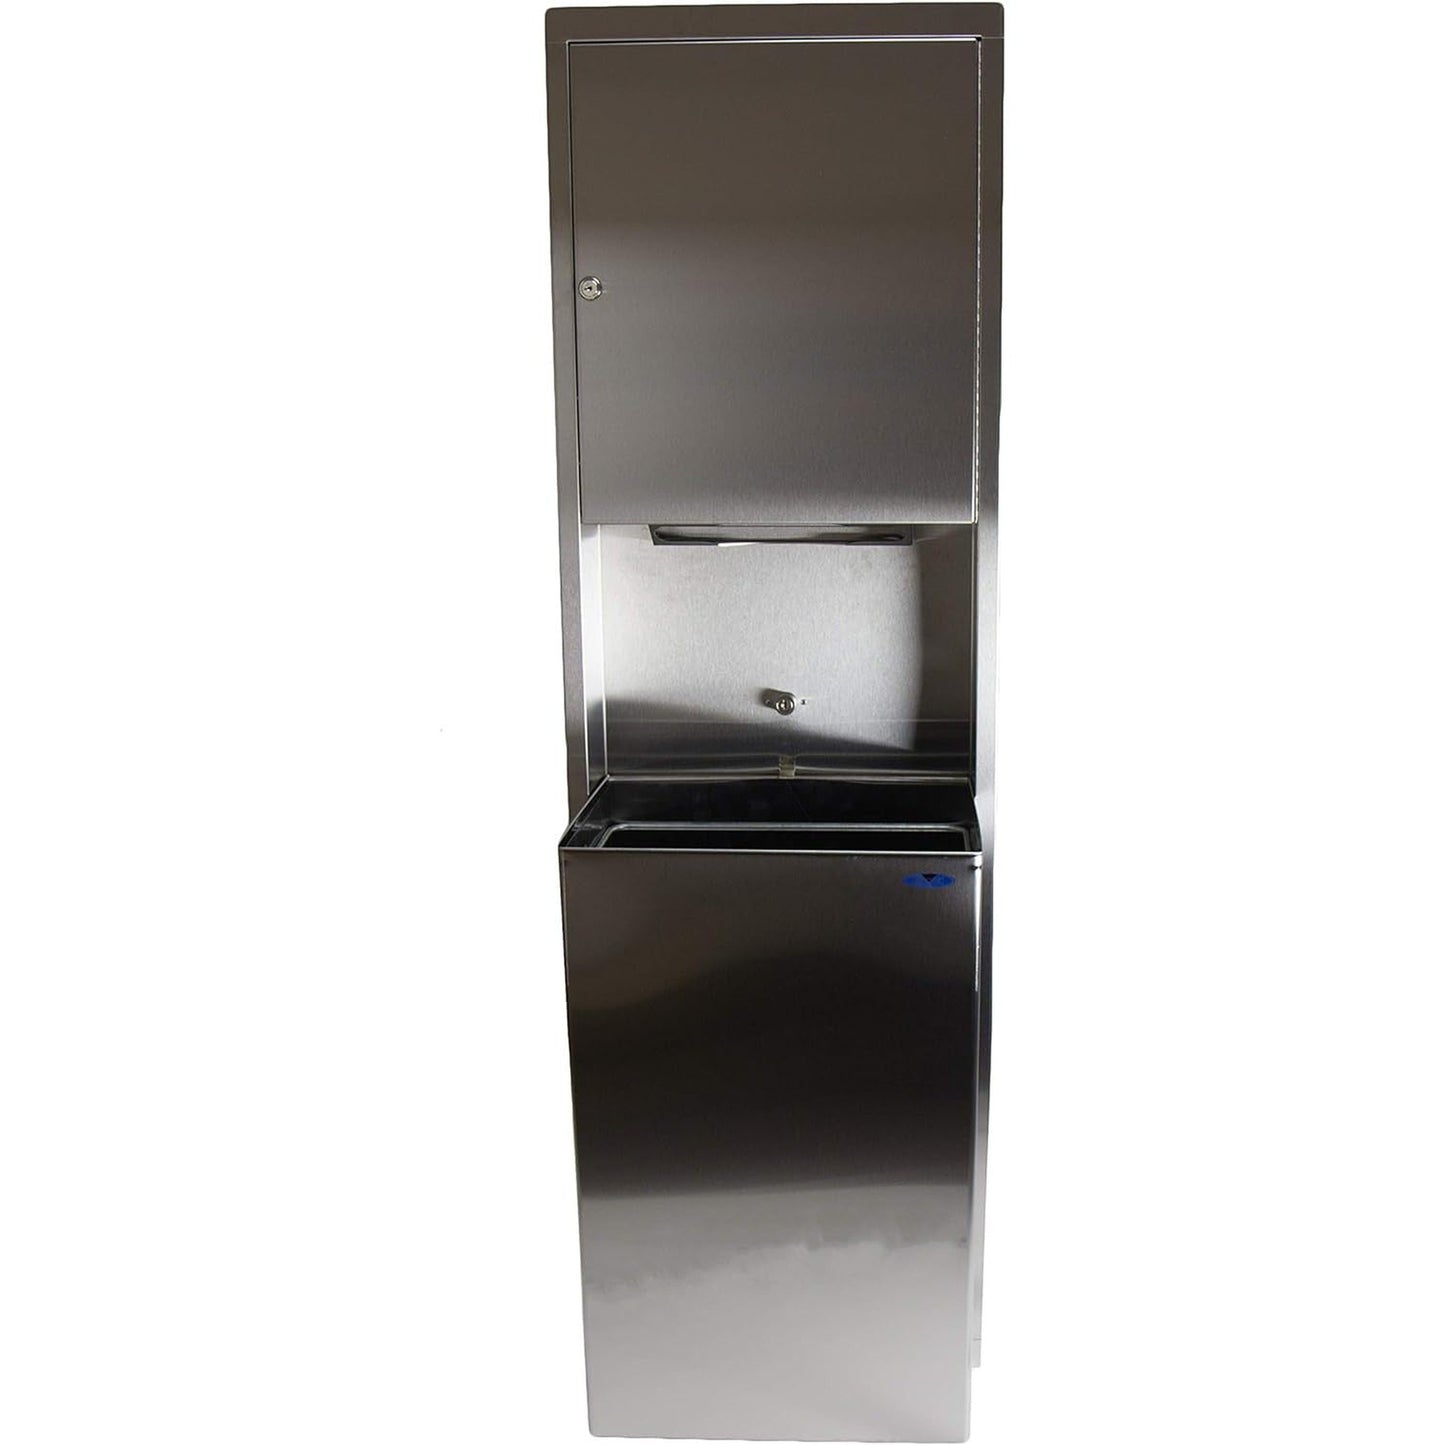 Frost 427C Wall Mounted Stainless Steel Paper Dispenser and Disposal